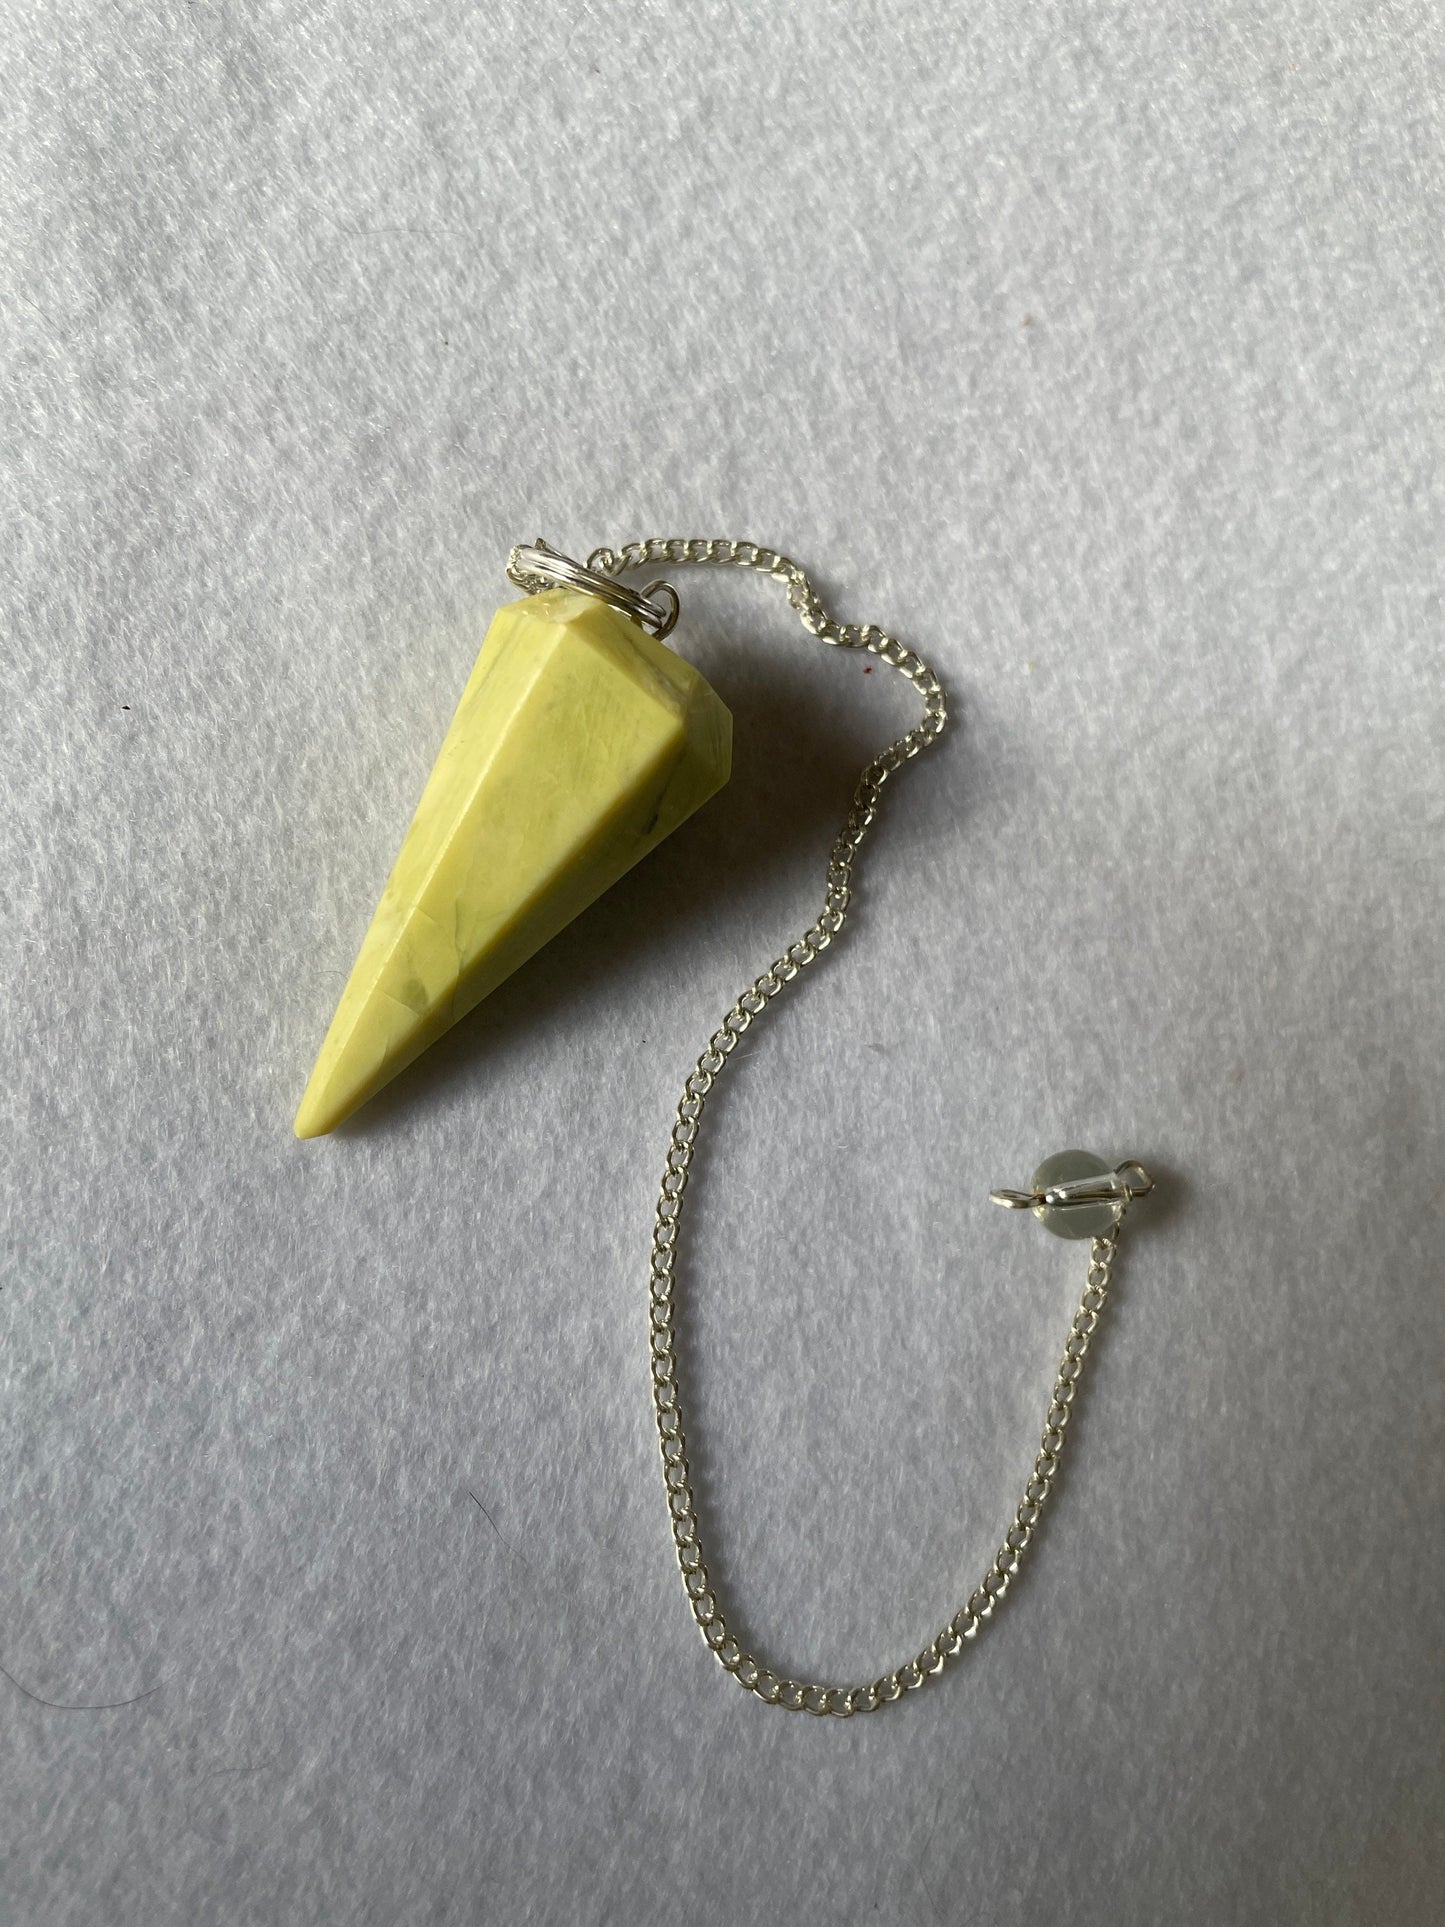 Beautiful Serpentine Pendulum is  1.5” and with chain is 9”.